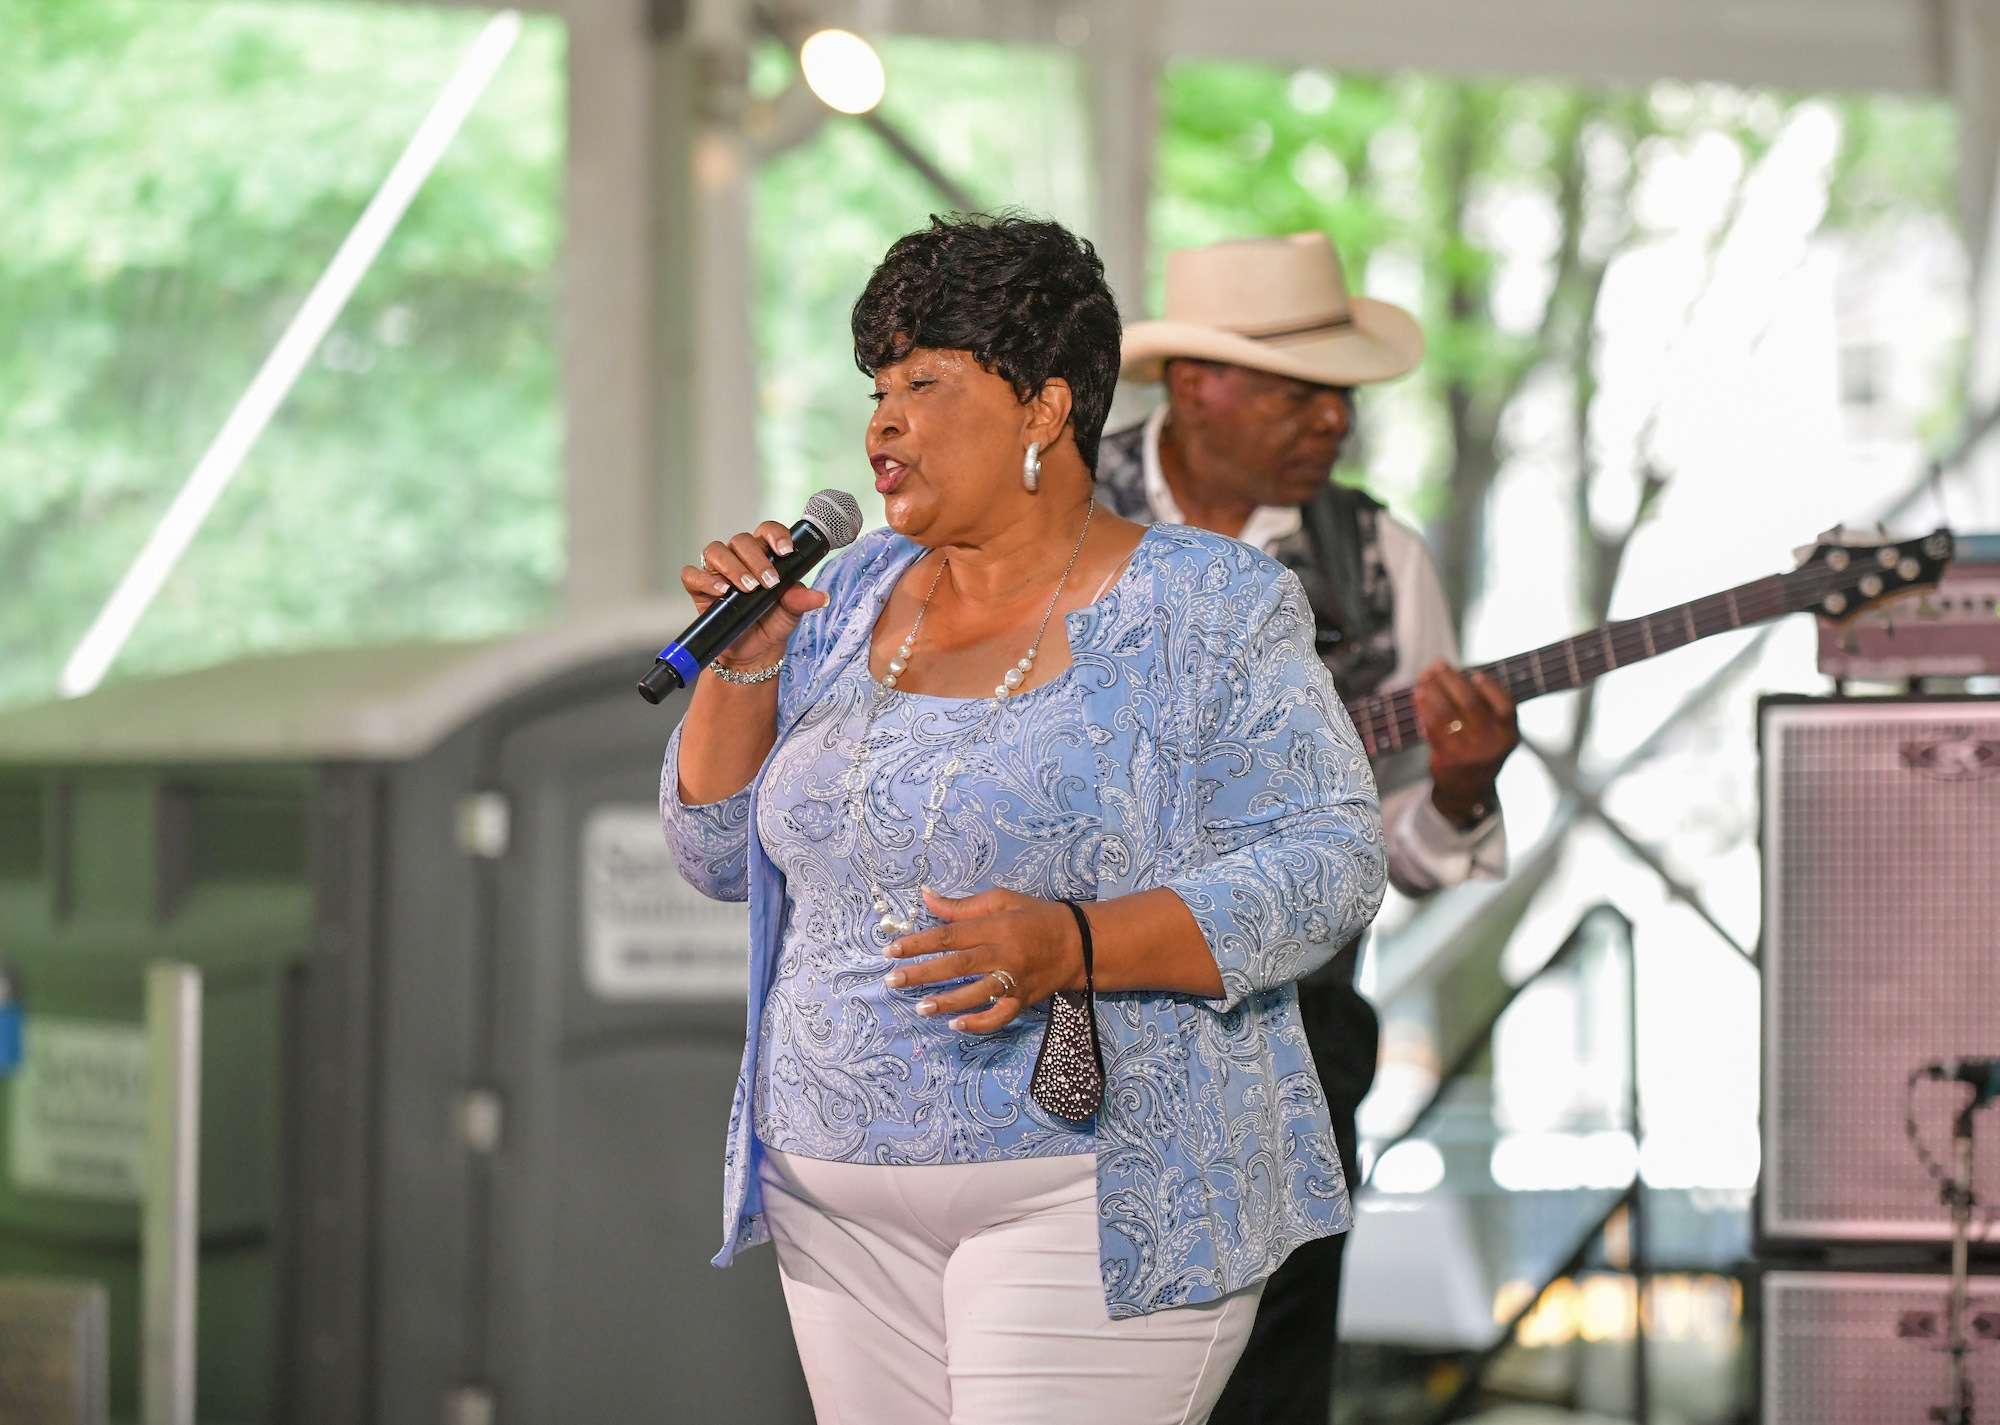 Ms Jody Live At Chicago Blues Fest [GALLERY] 9